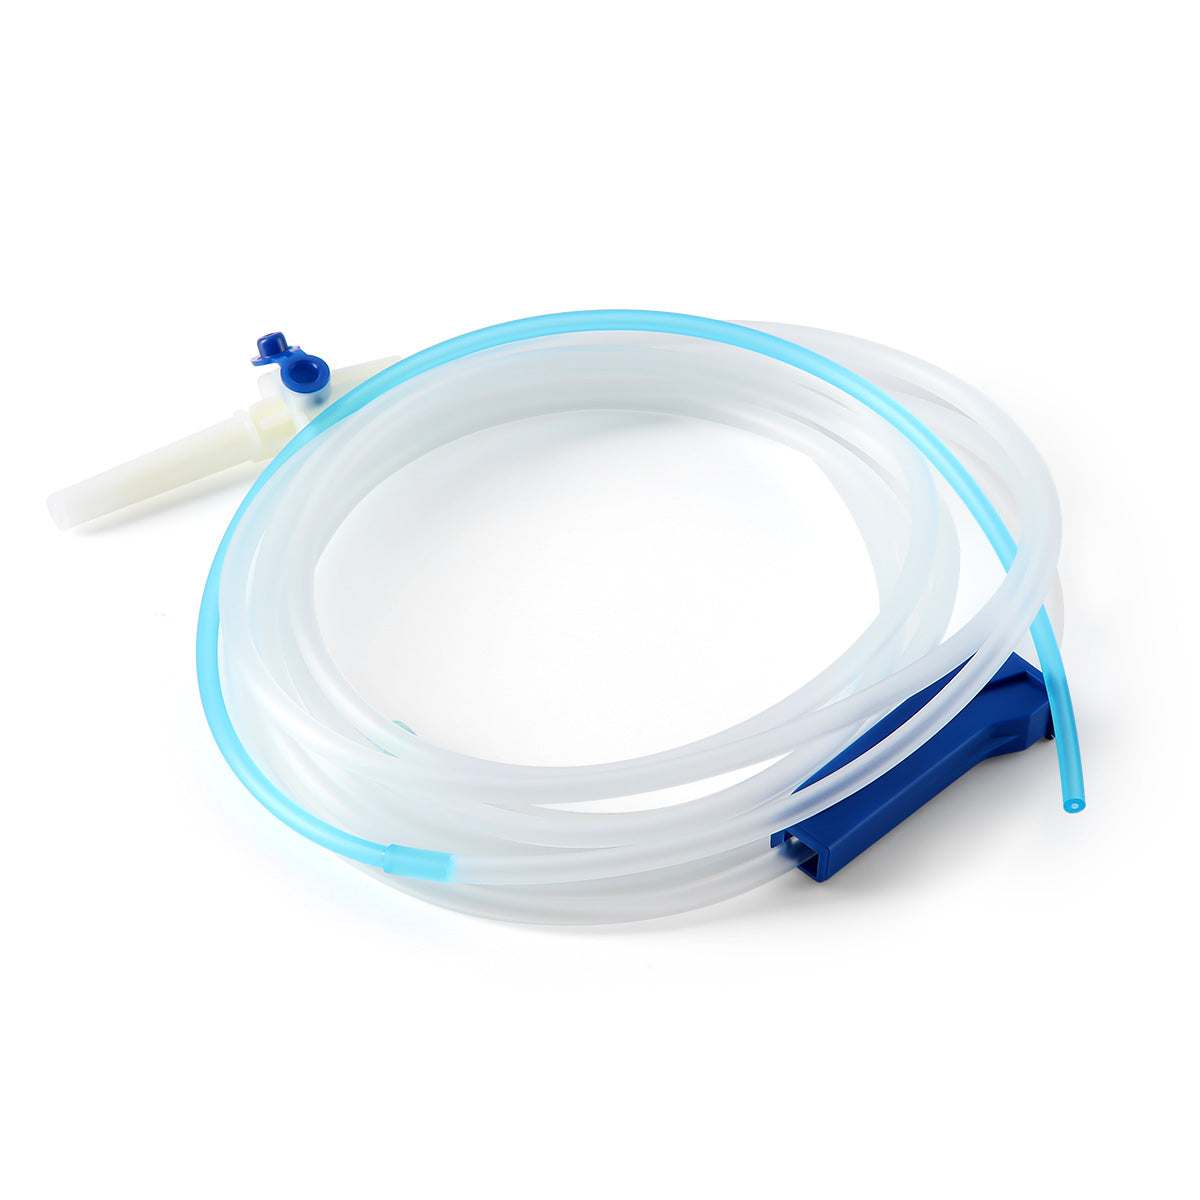 Disposable Dental Surgical Irrigation Tube - pairaydental.com